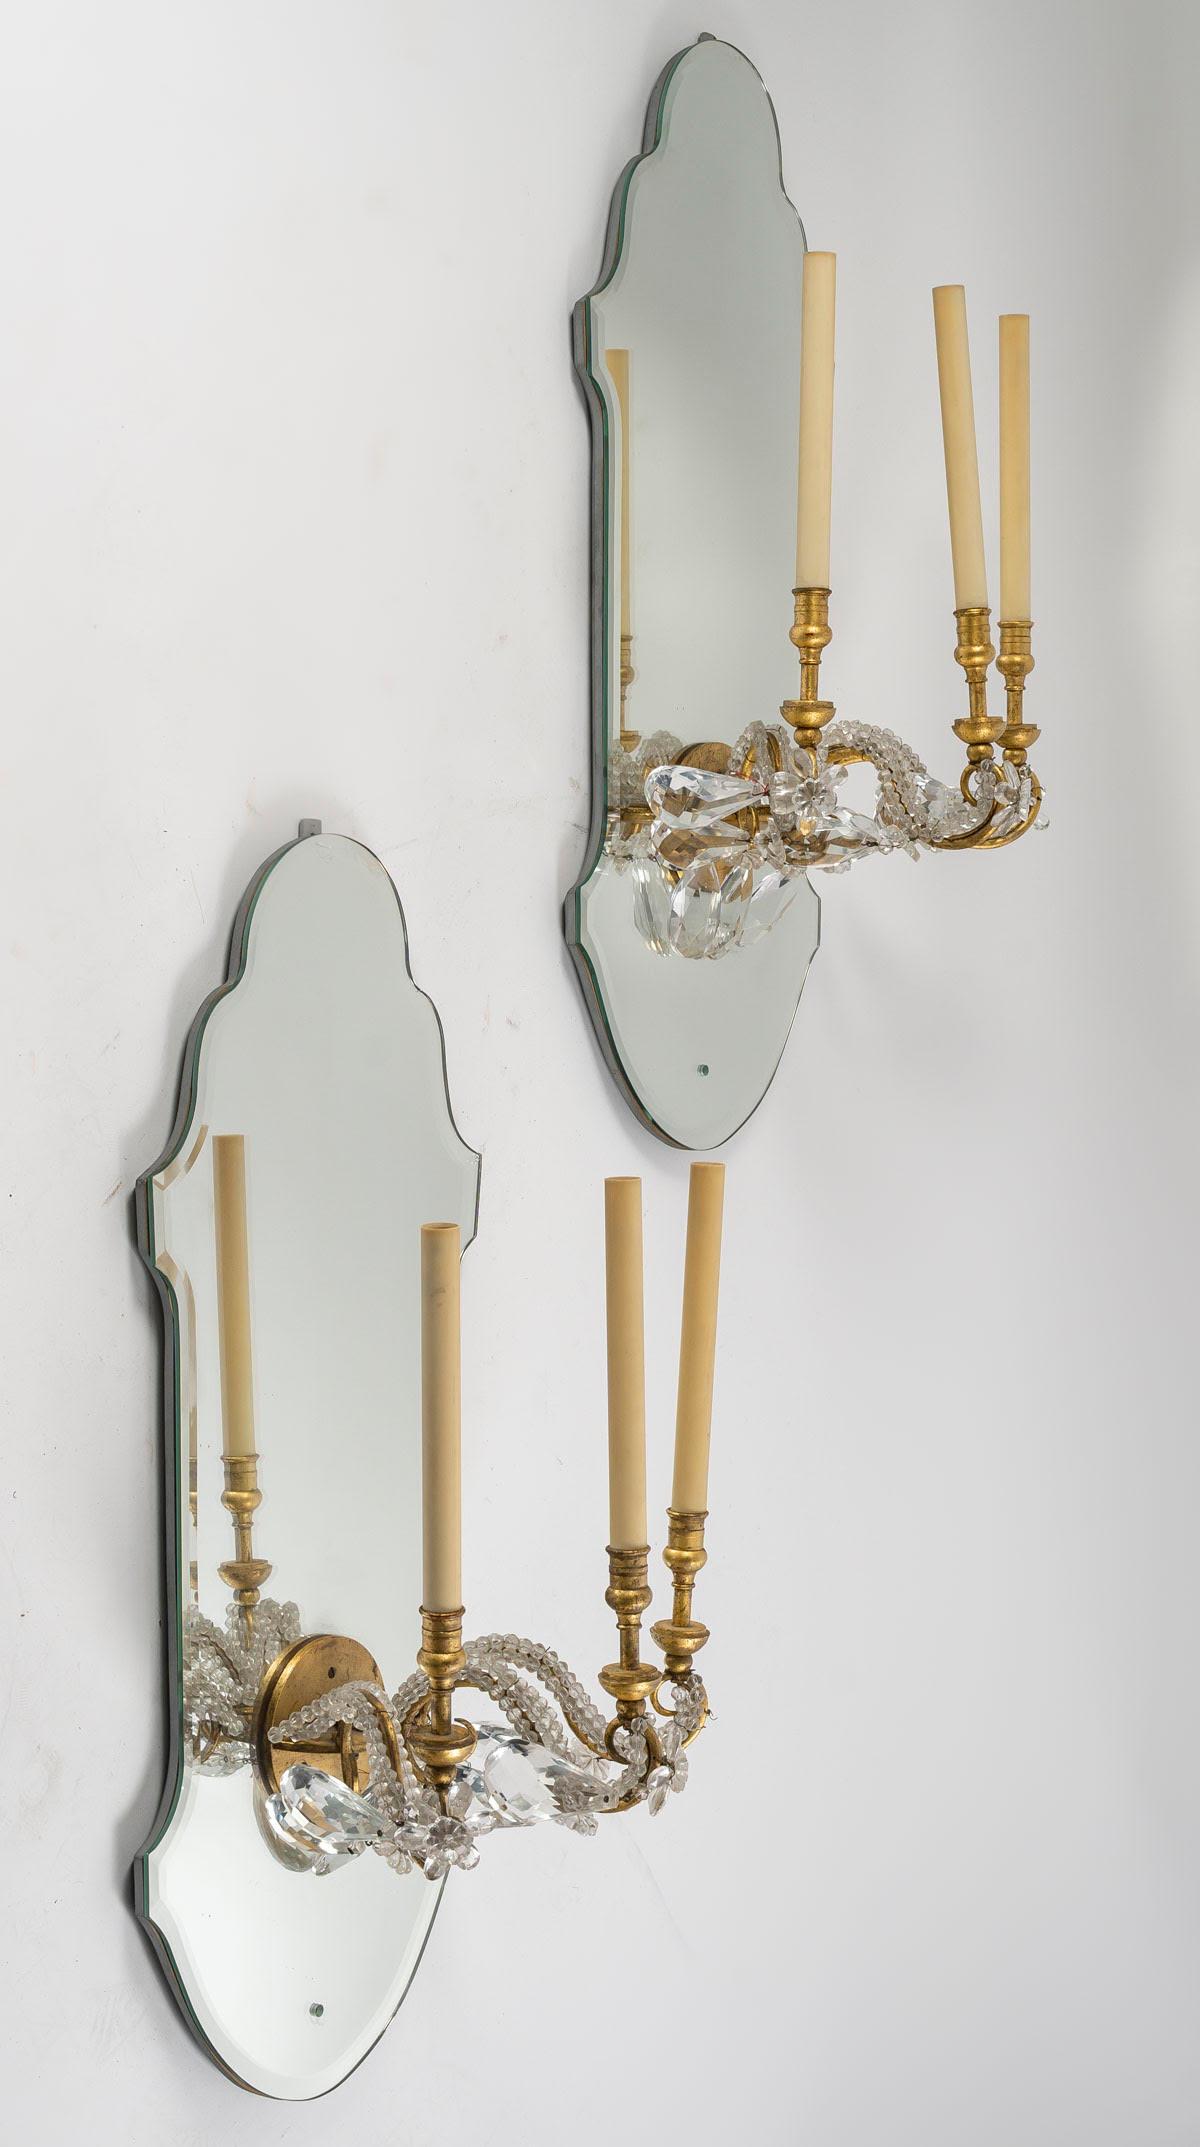 Mid-Century Modern Suite of 4 Gilded Iron and Mirror Sconces with Glass Drops, 1950-1960. For Sale